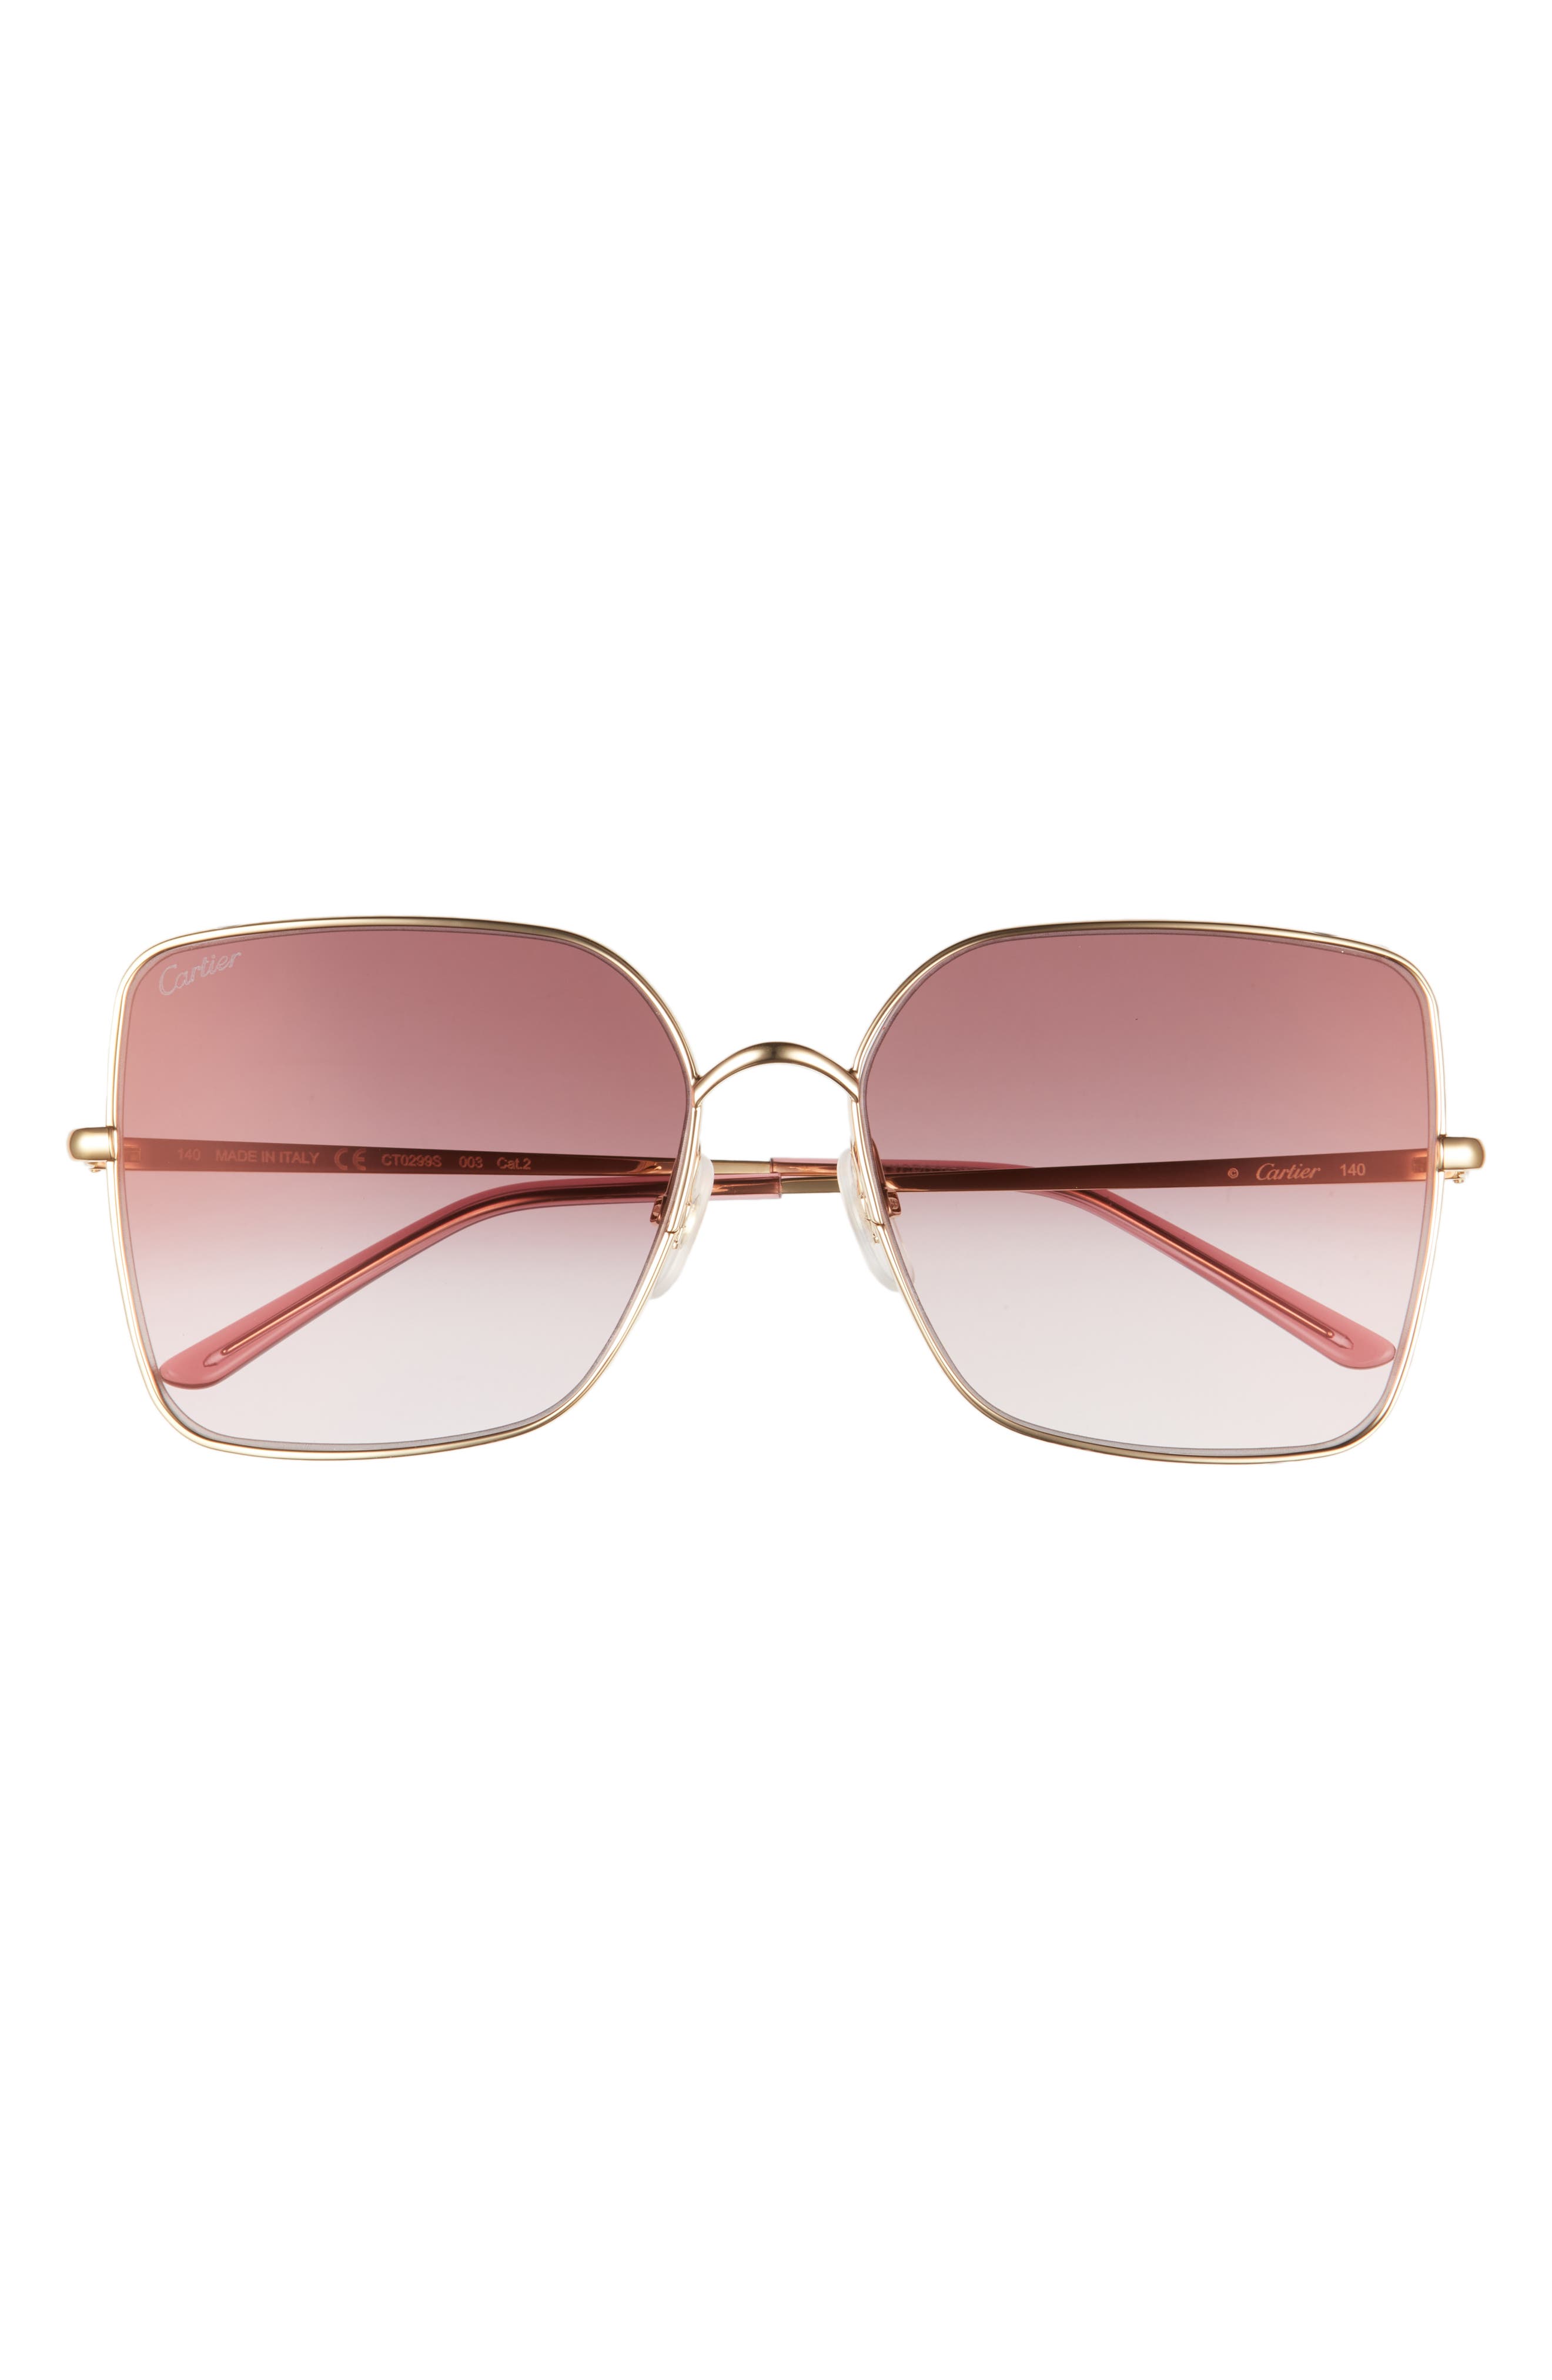 Cartier 59mm Square Sunglasses in Gold/Rose at Nordstrom